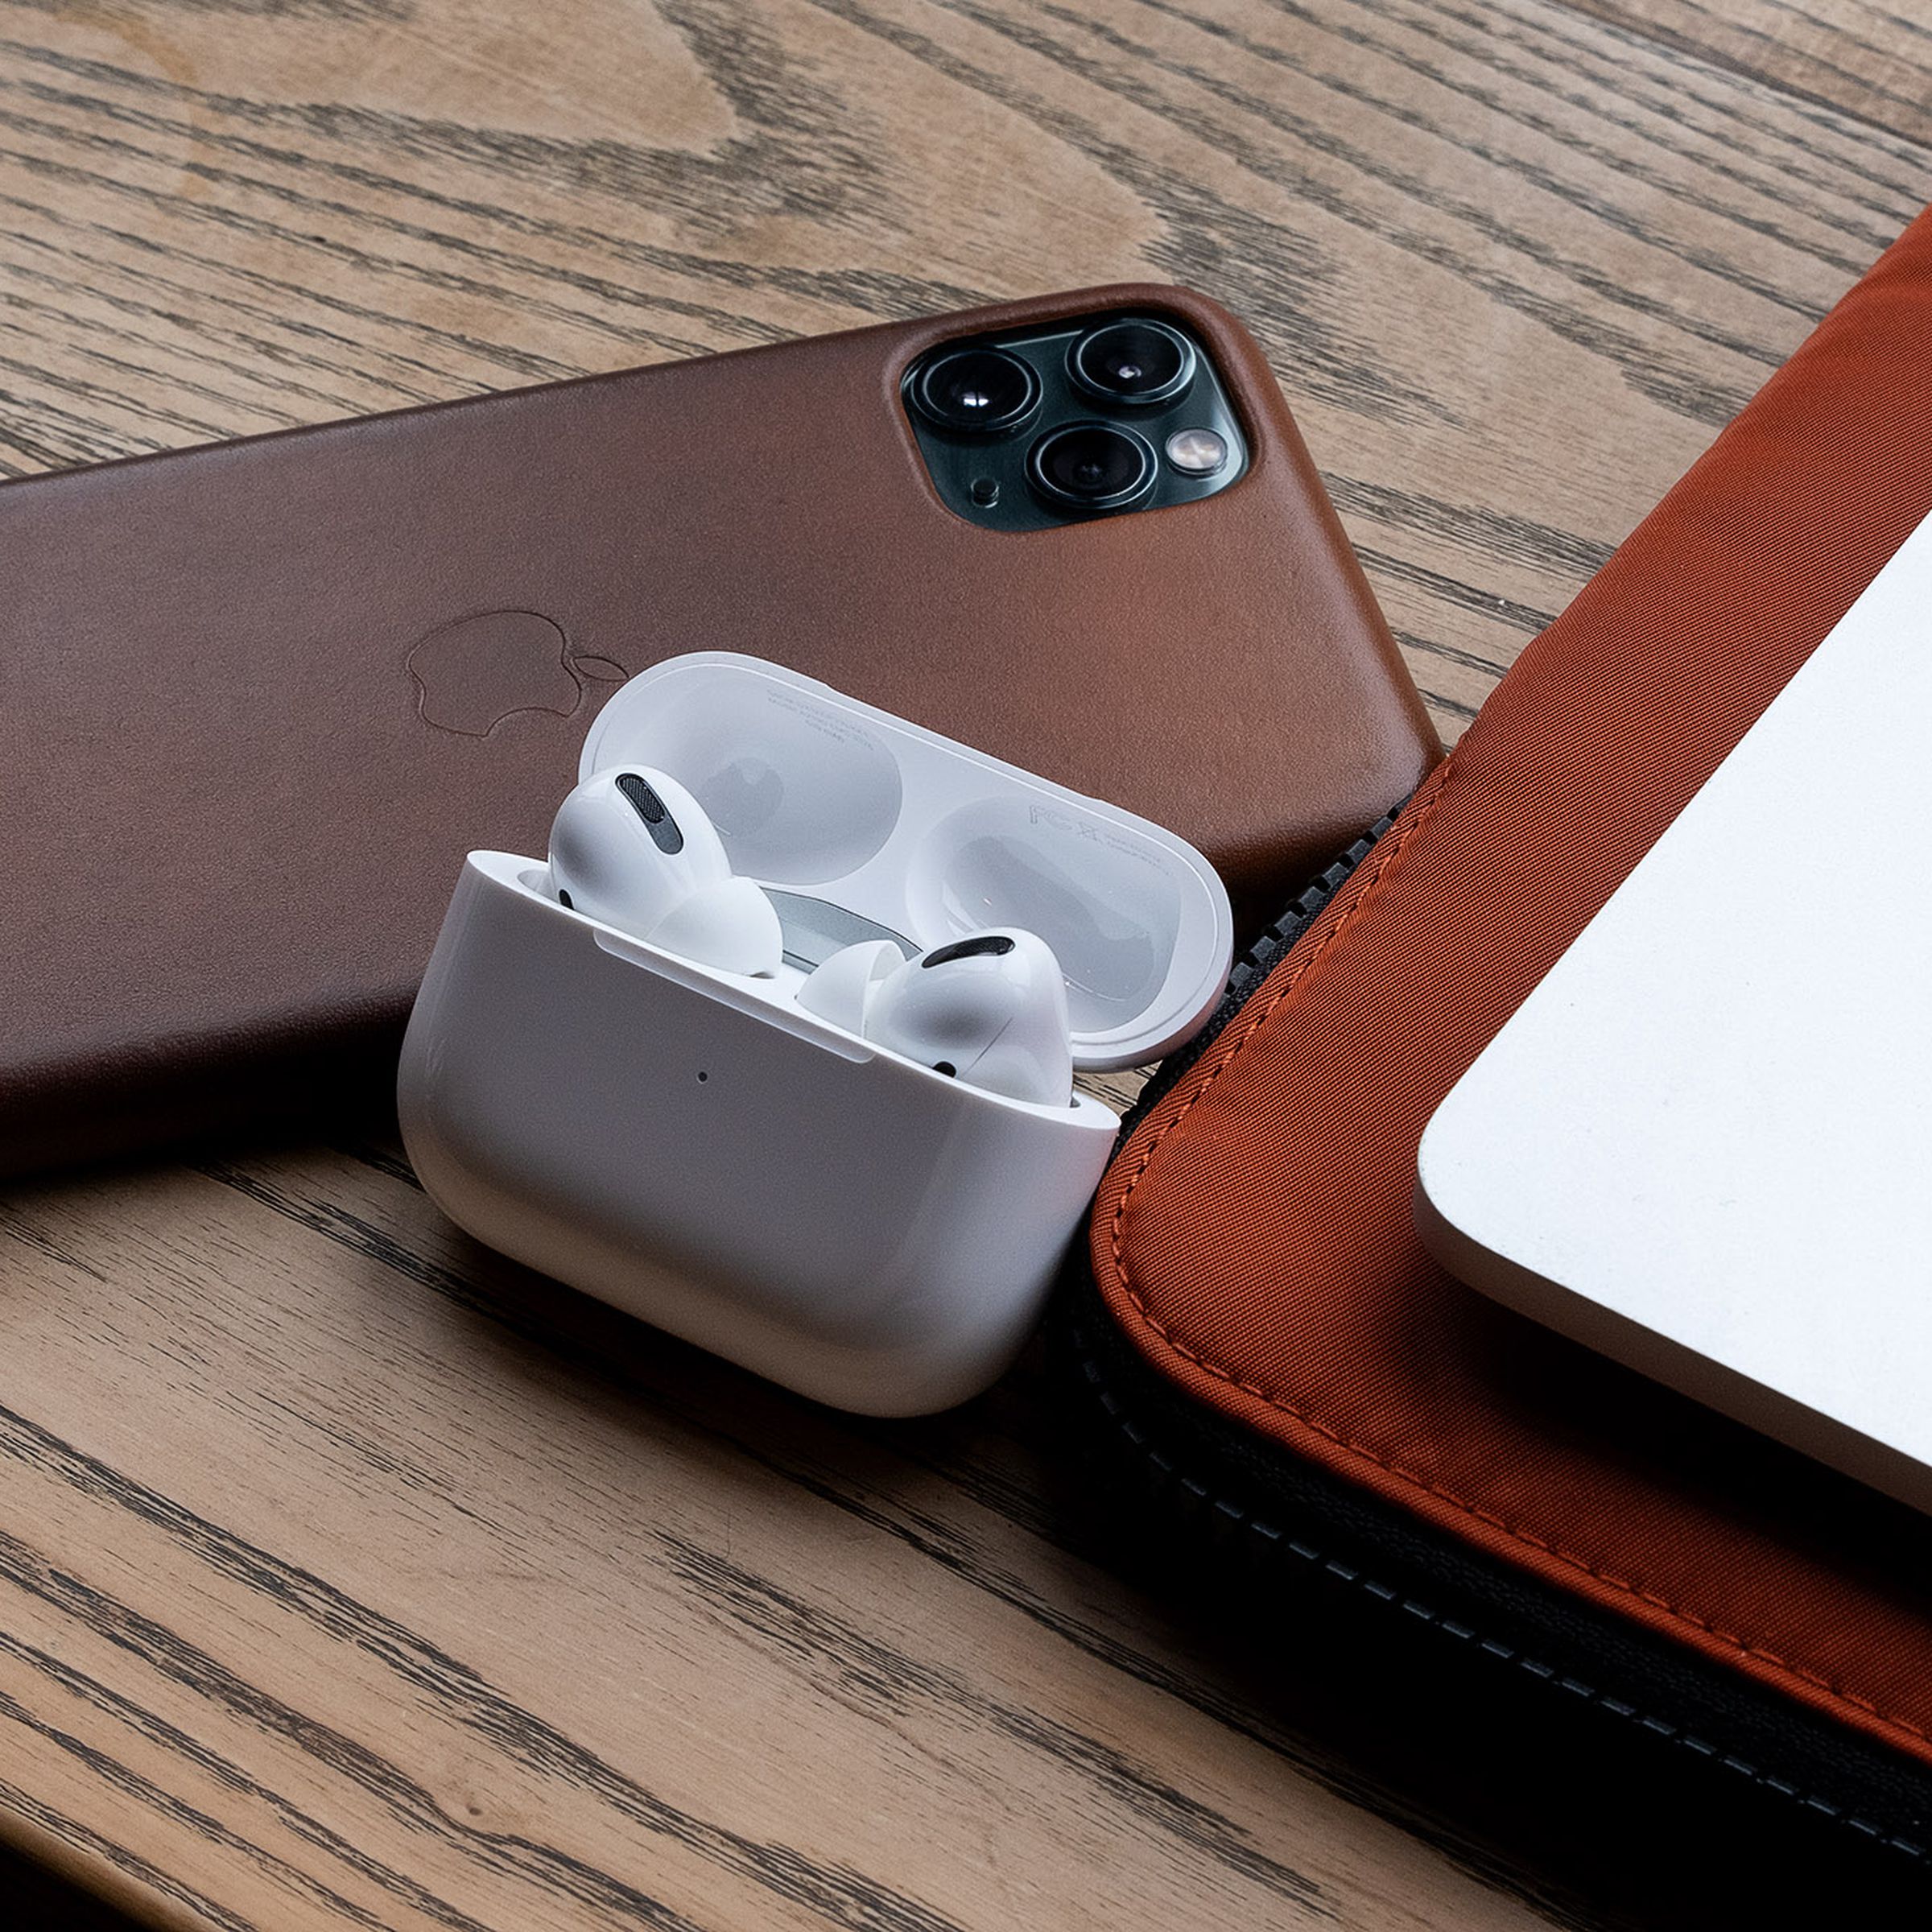 AirPods Pro, the best wireless earbuds for people who use Apple products, are described next to the iPhone 11 Pro Max and MacBook Pro.